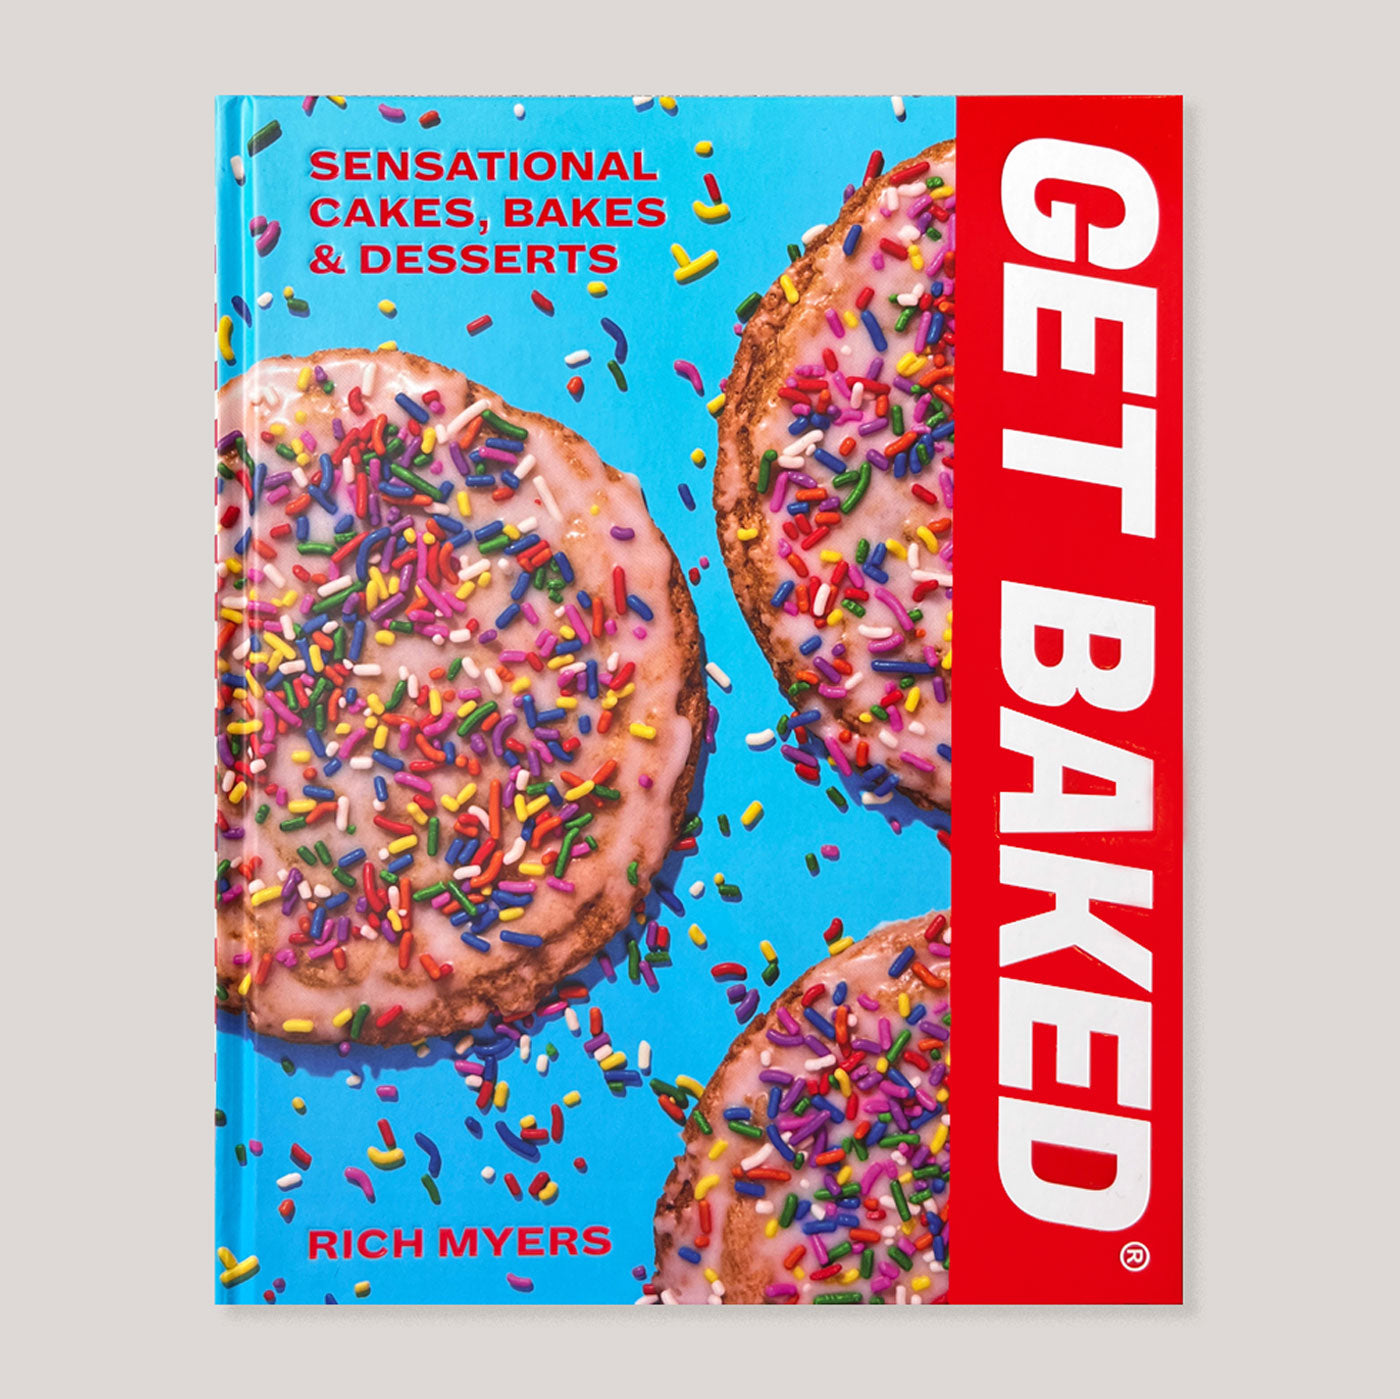 Get Baked: Sensational Cakes, Bakes & Deserts | Rich Myers | Colours May Vary 